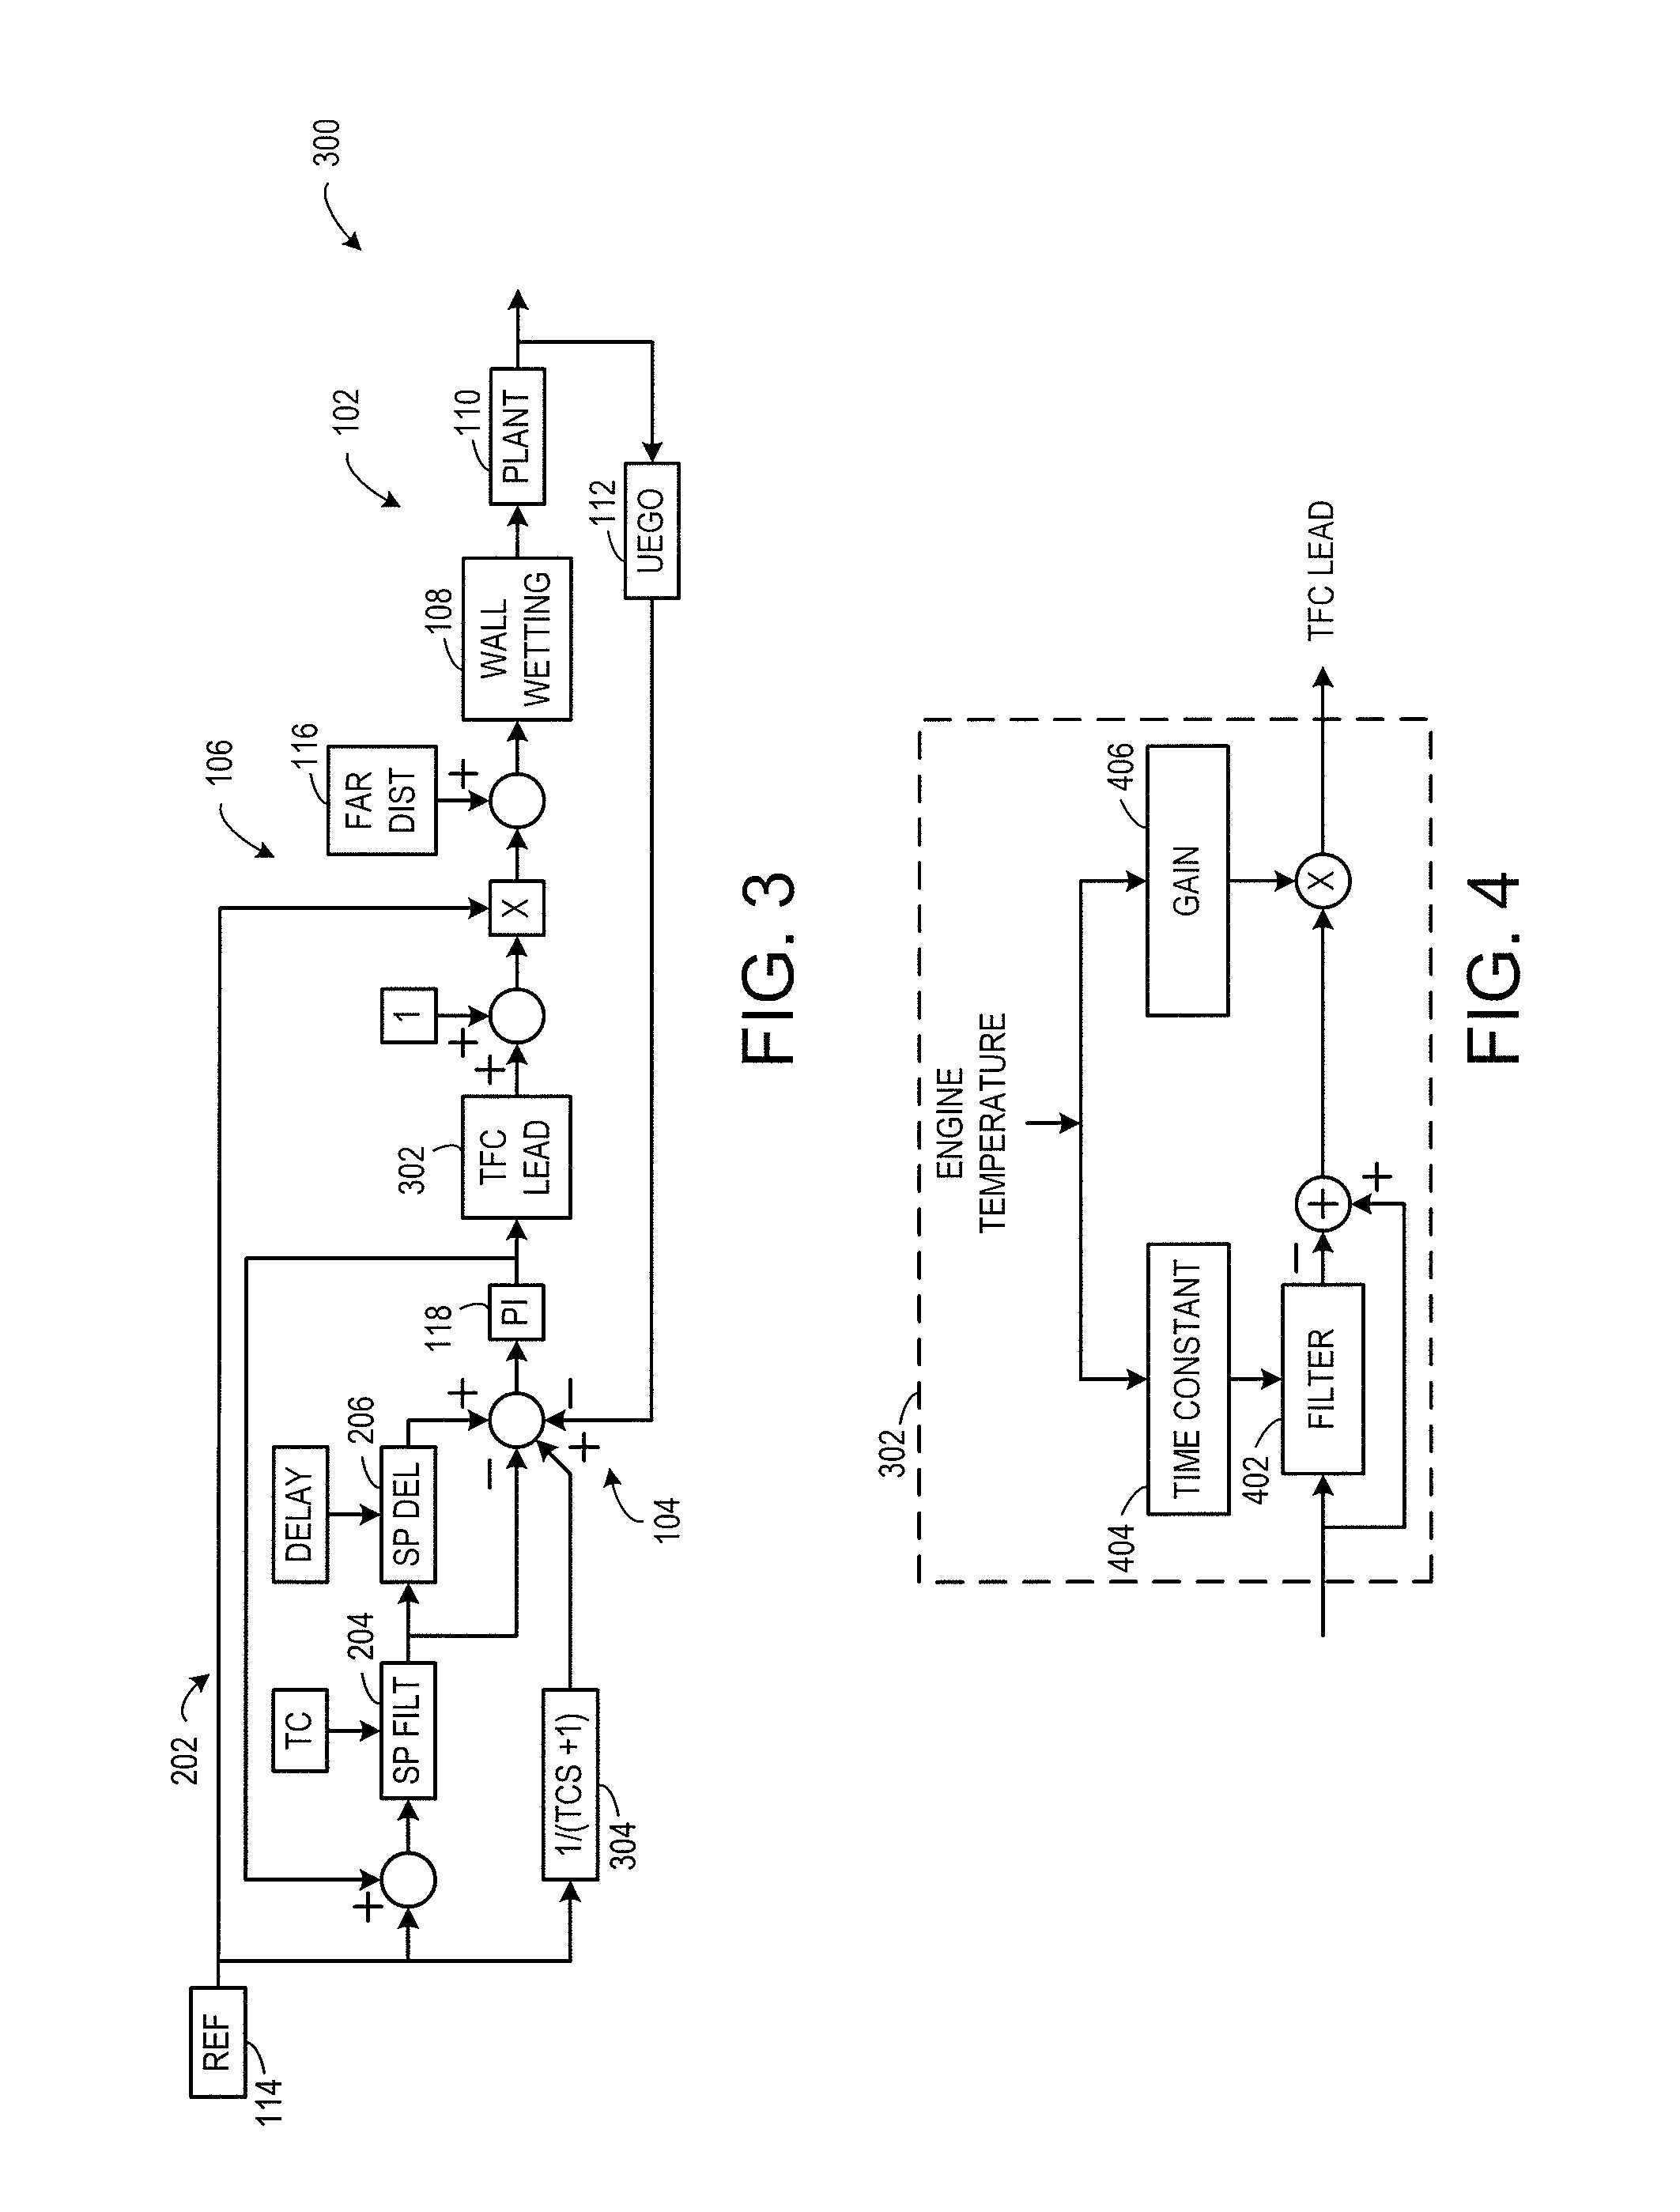 Delay Compensated Air/Fuel Control of an Internal Combustion Engine of a Vehicle